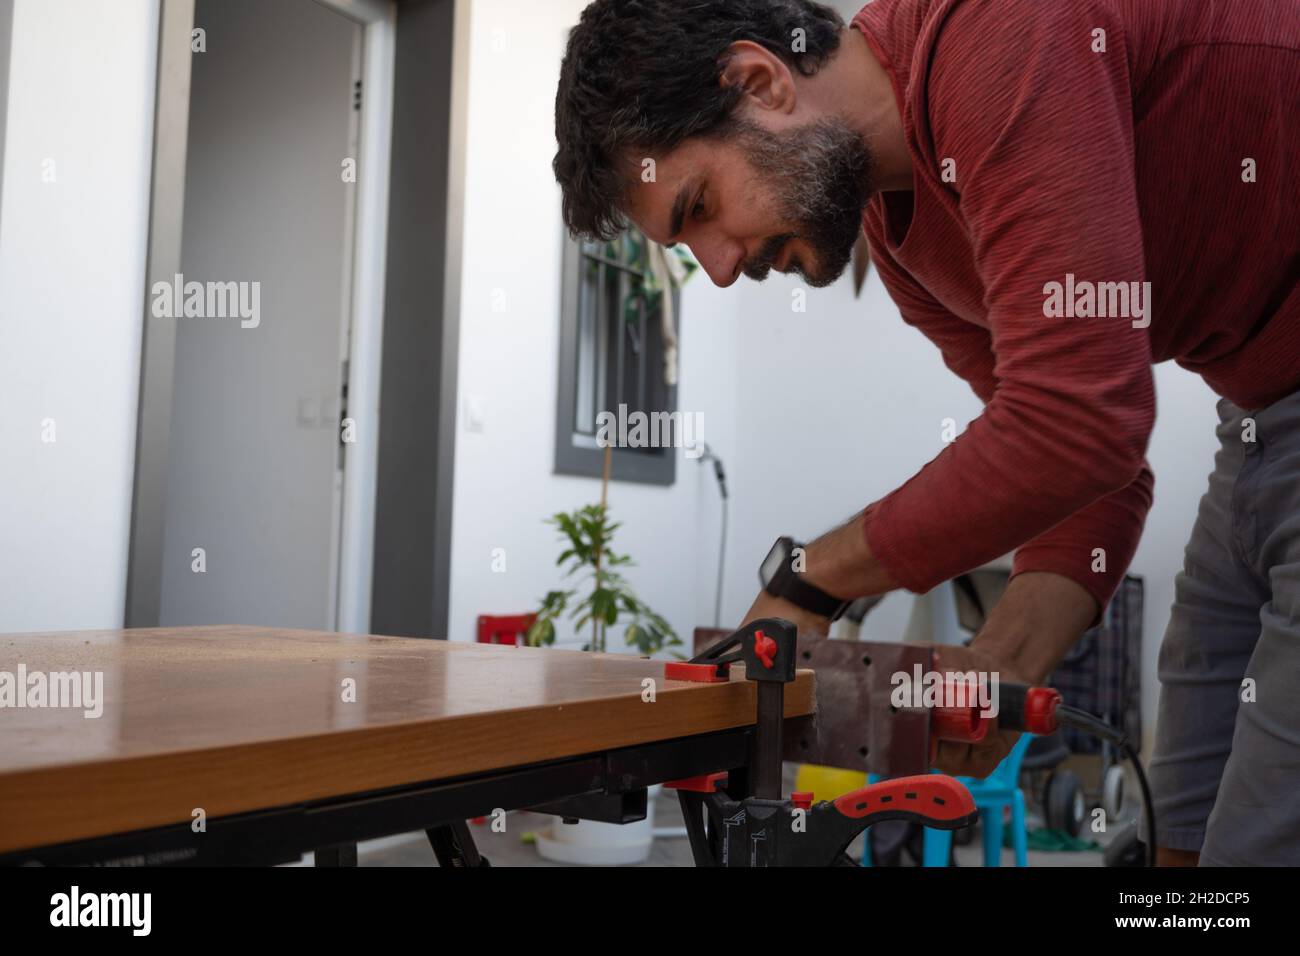 young man using carpenter's power tools making wooden furniture in his home Stock Photo